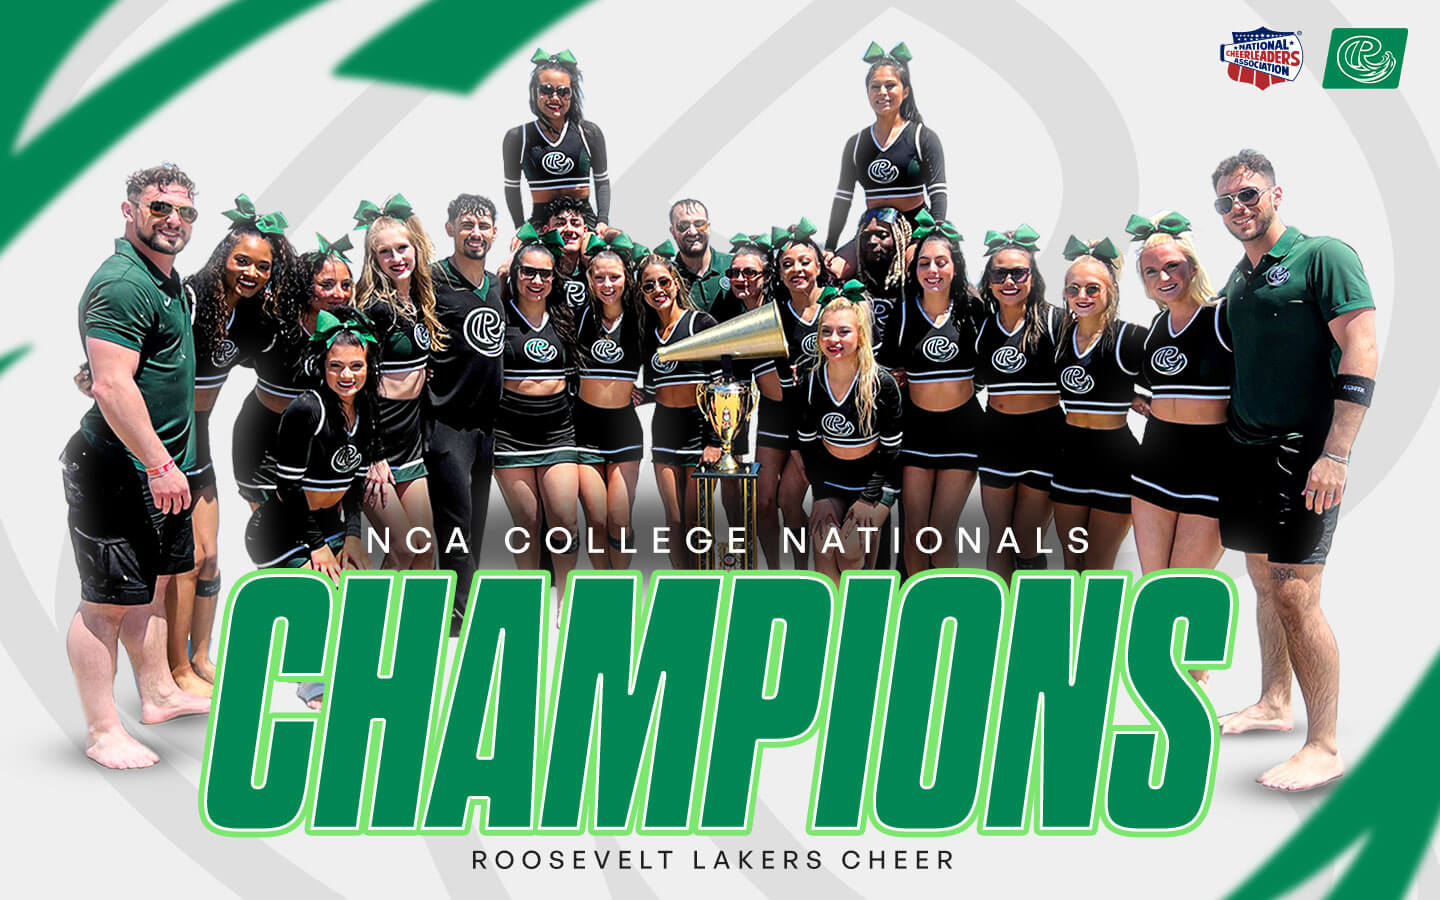 NCA College Nationals Champions - Roosevelt Lakers Cheer